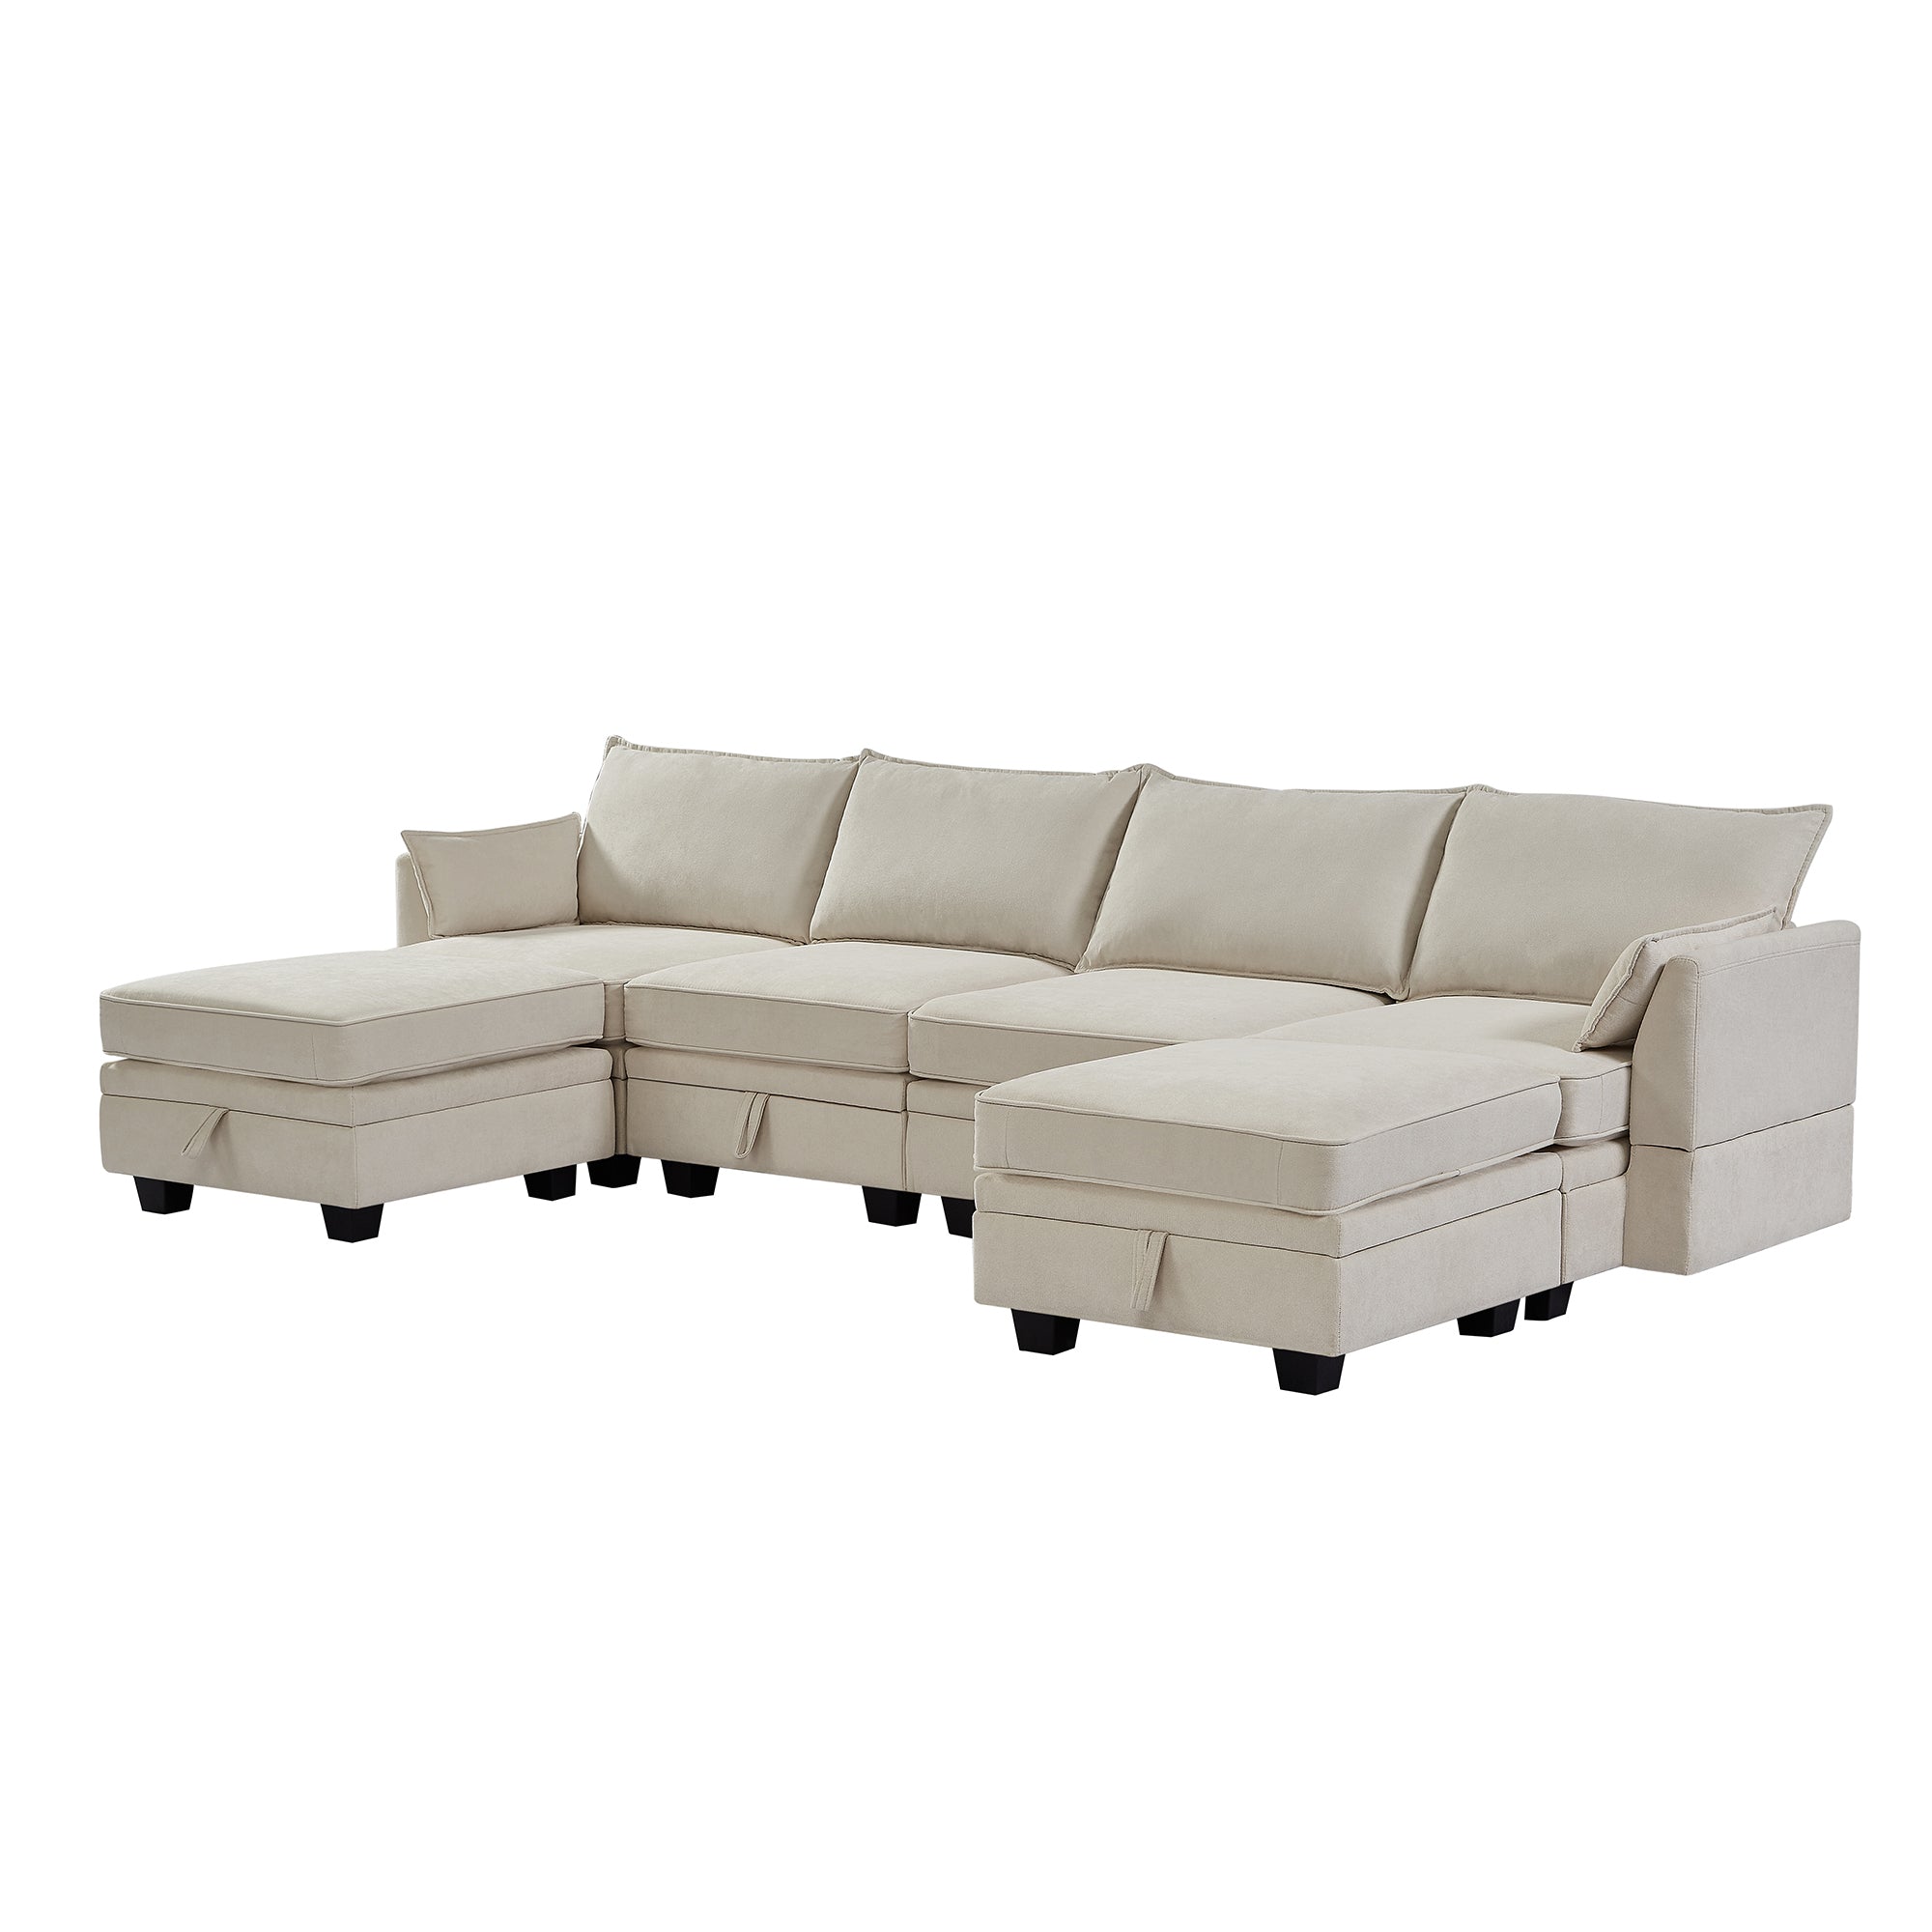 Beige Linen Modular Sectional Sofa with Storage